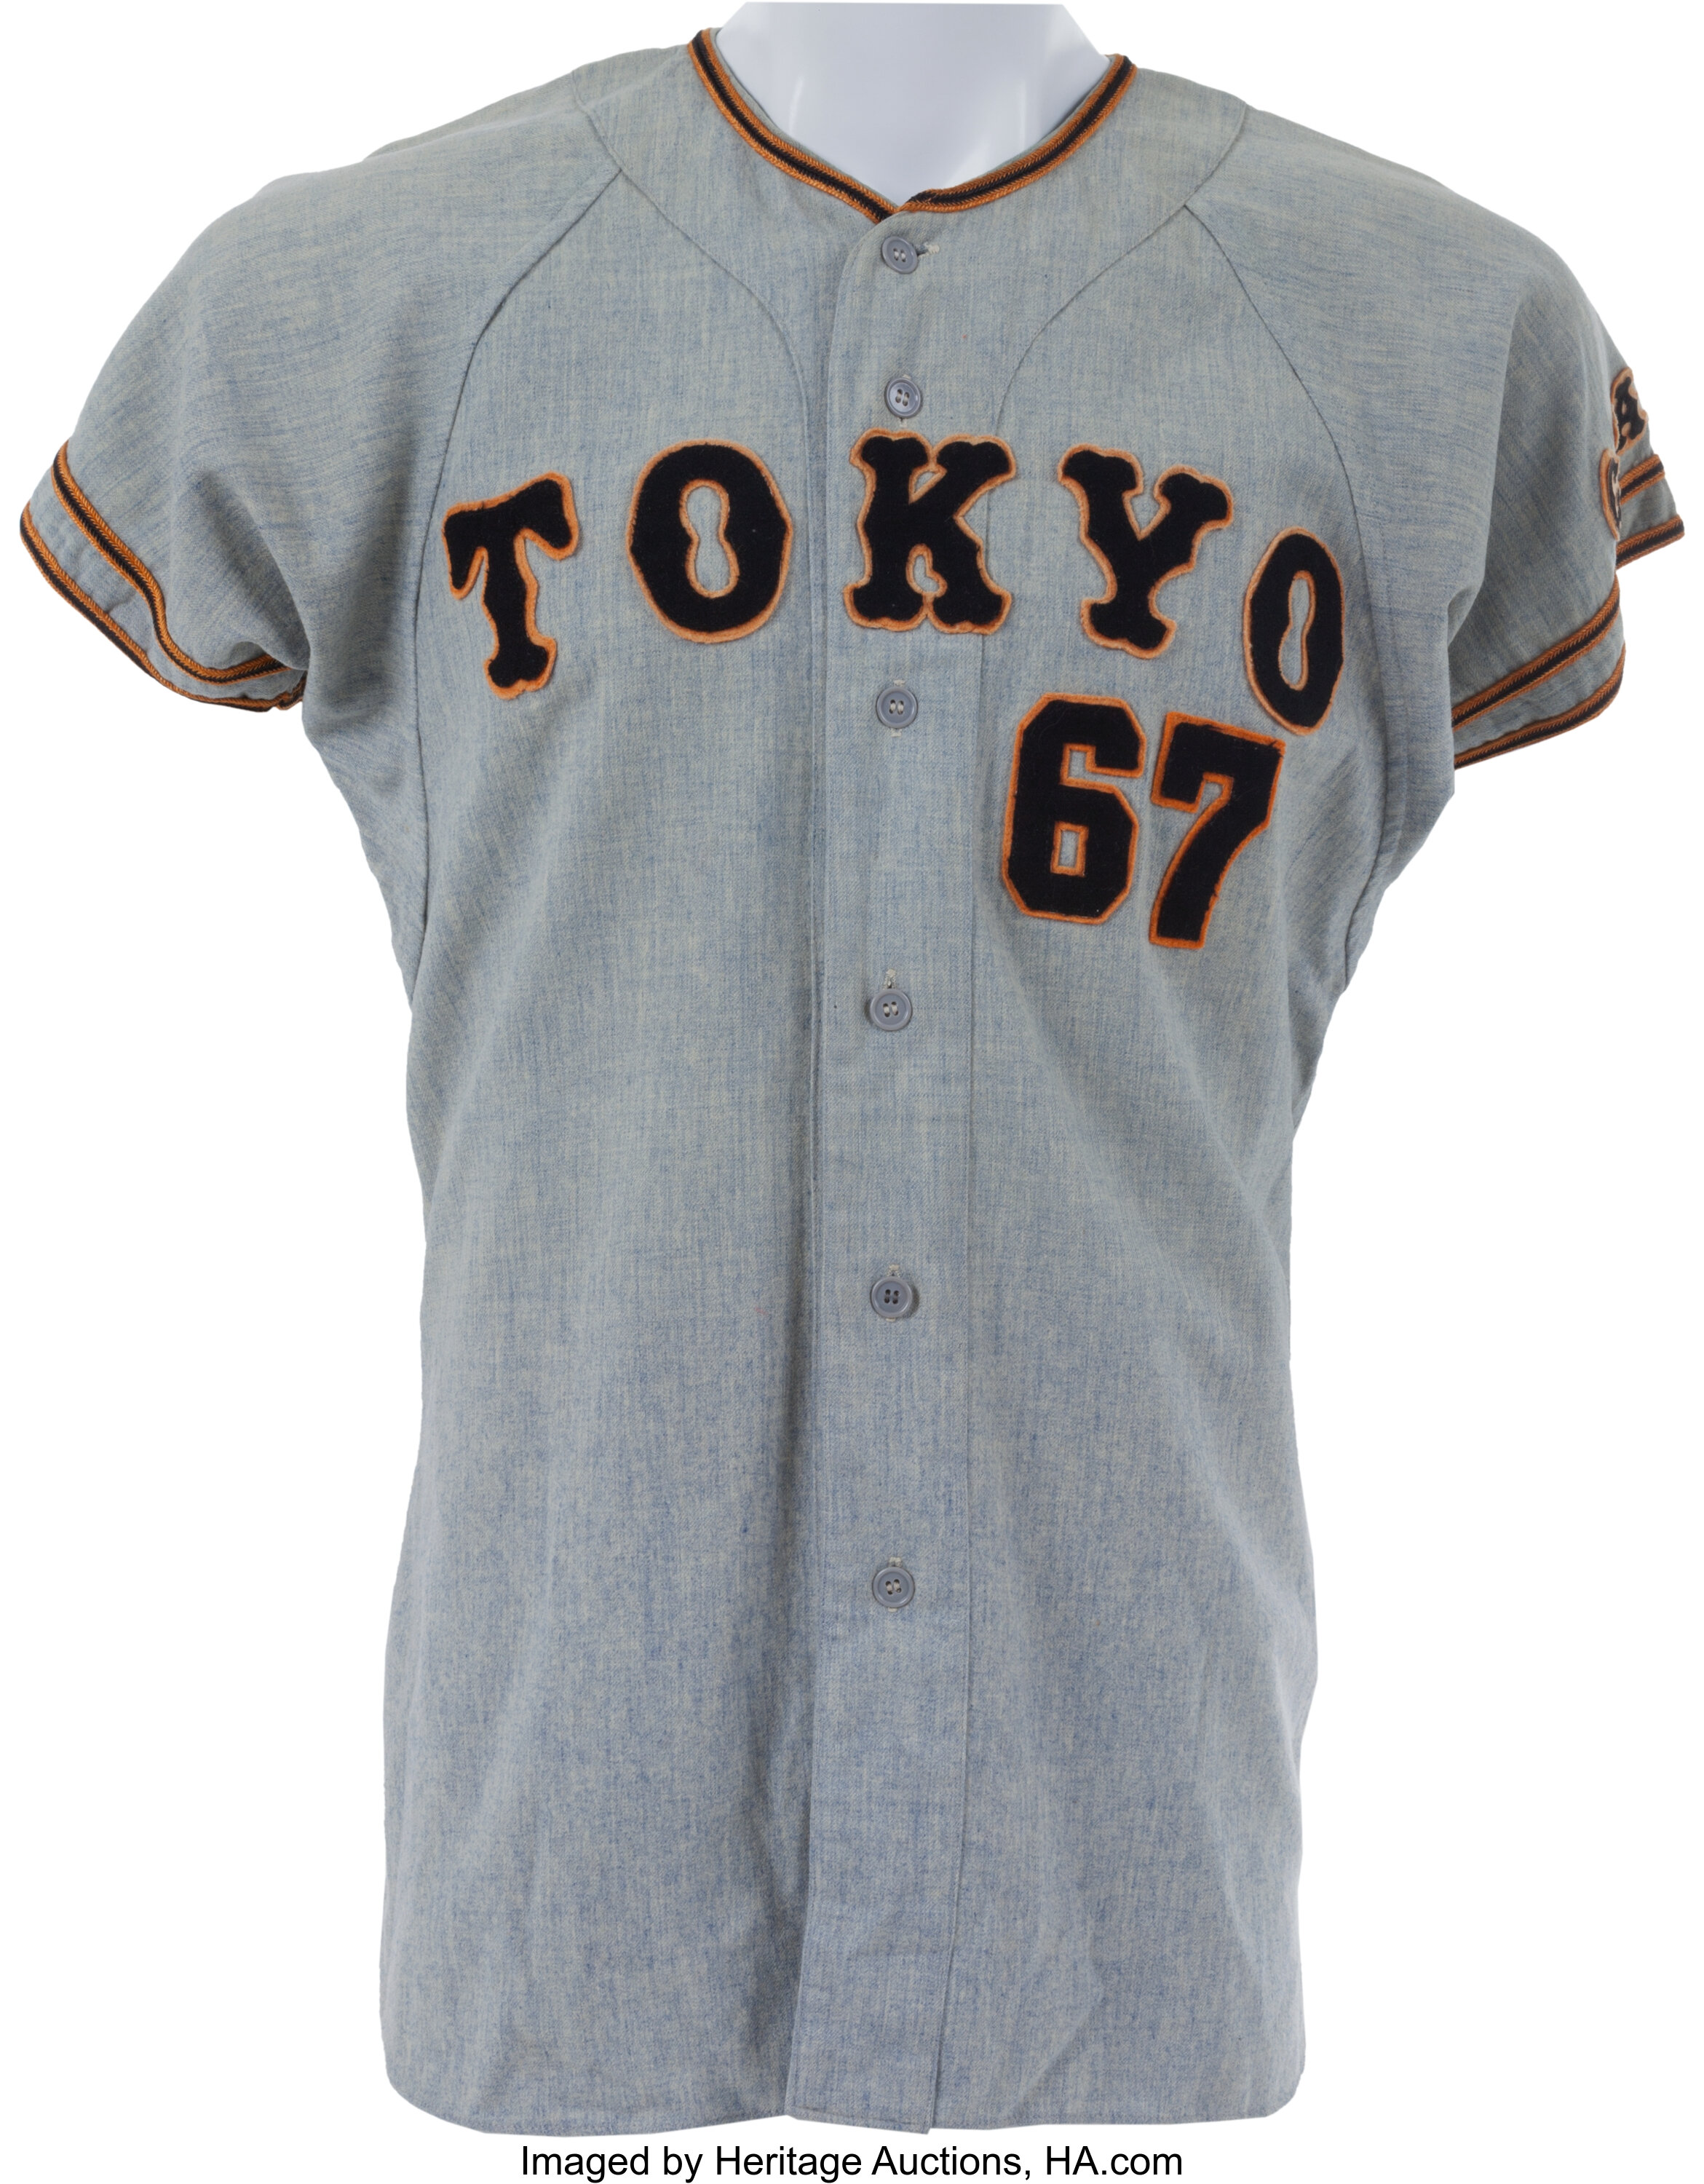 1960's Tokyo Giants Game Worn Jersey. Baseball Collectibles